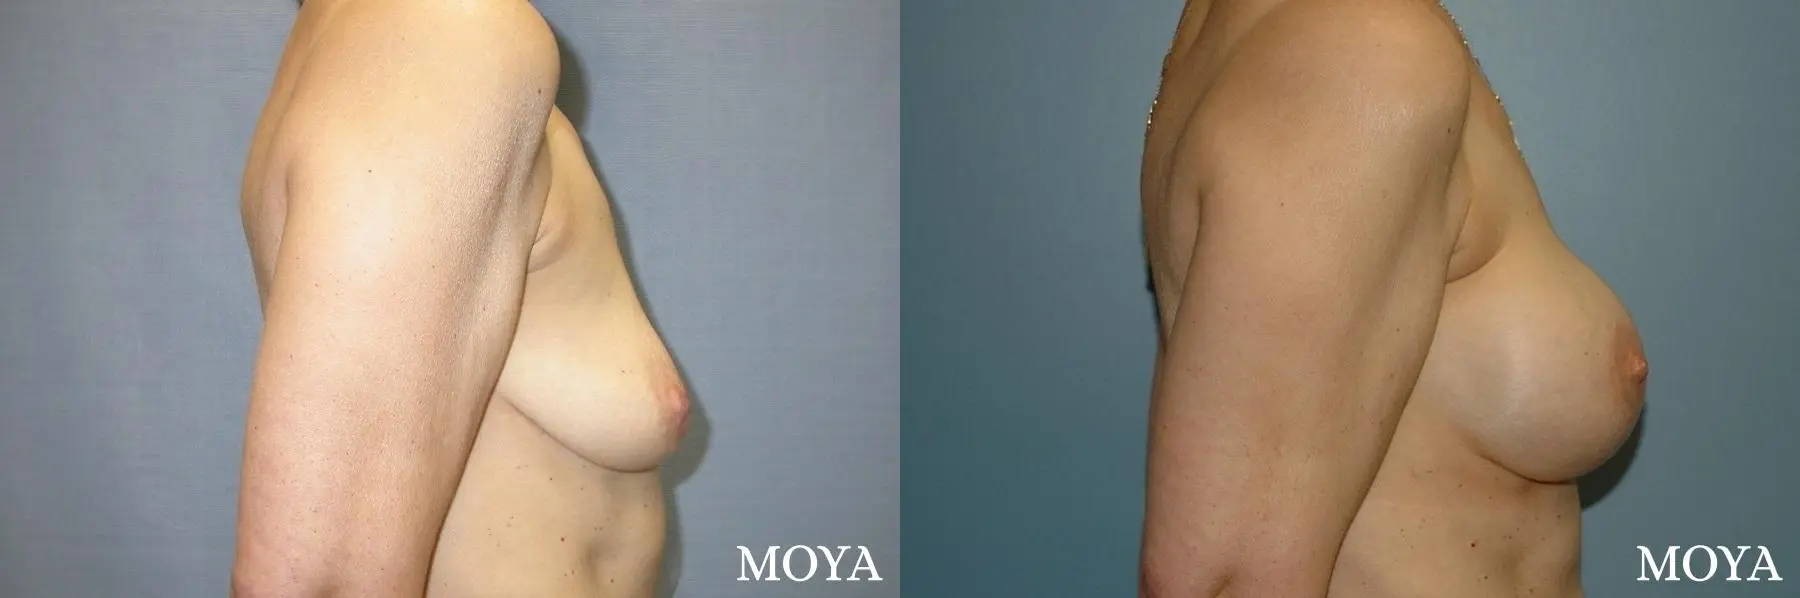 Breast Augmentation With Lift: Patient 3 - Before and After 2